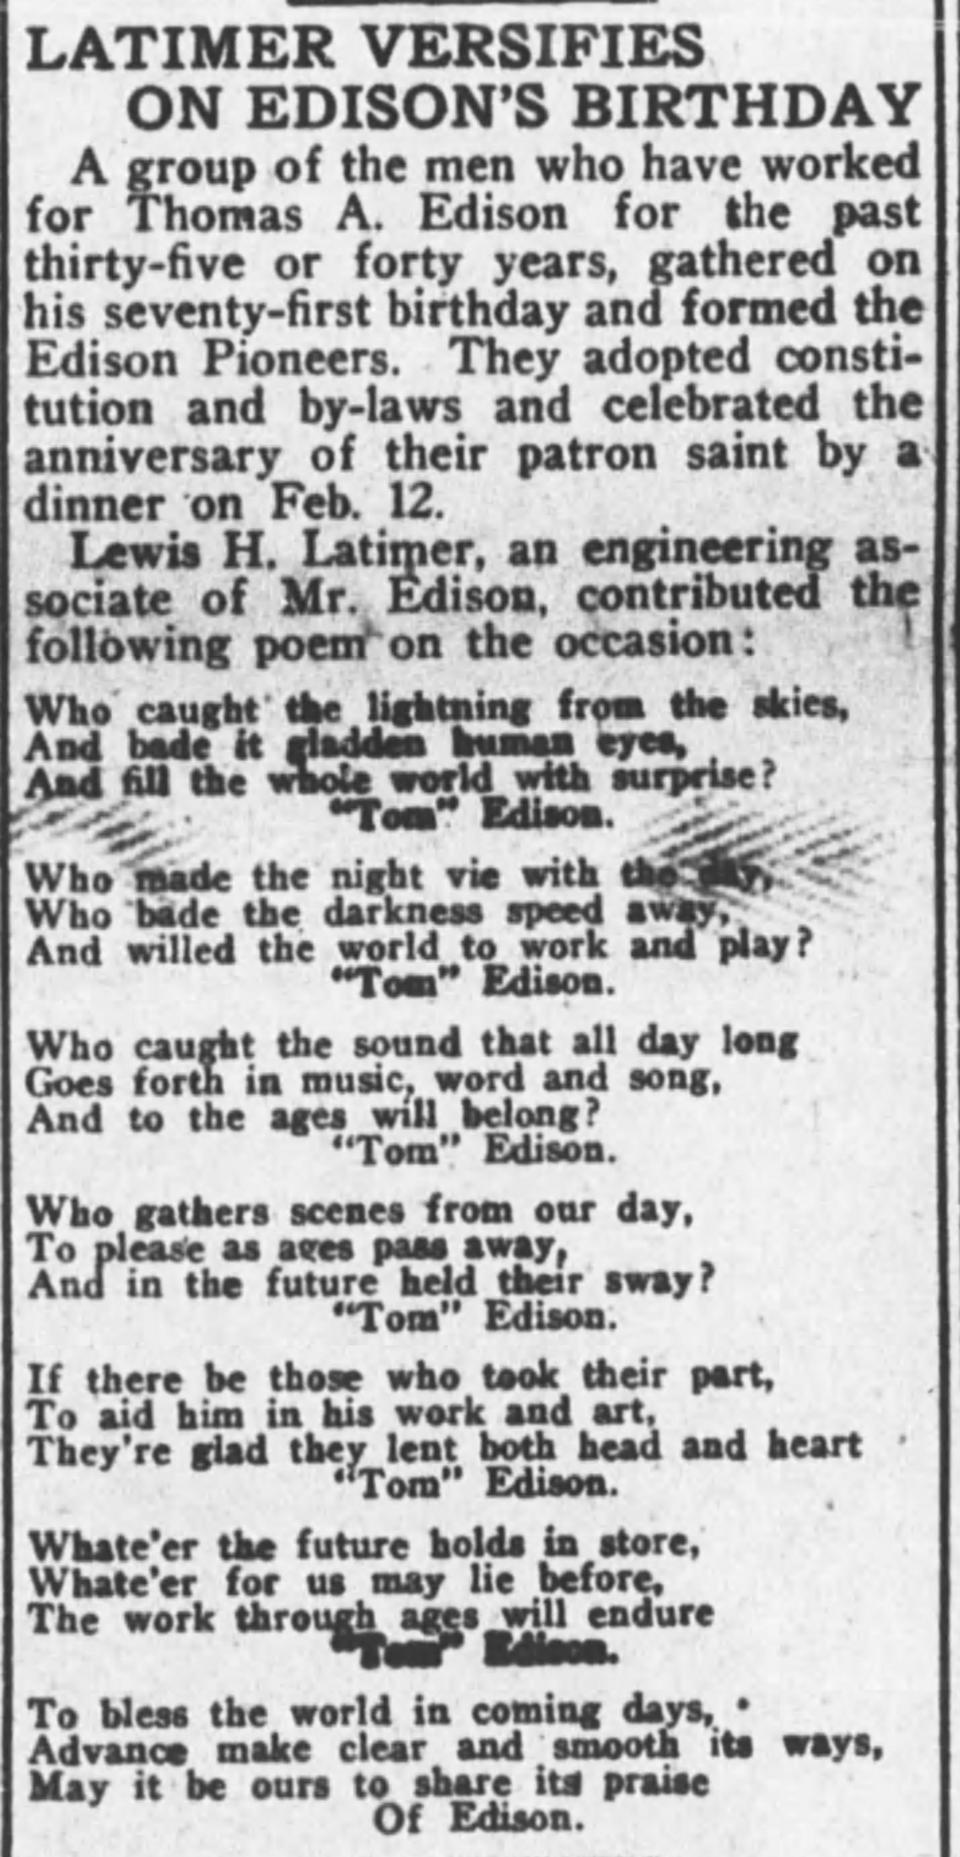 This poem written by Lewis H. Latimer was published in the New York Age on Feb. 23, 1918, for the birthday of inventor Thomas Edison.